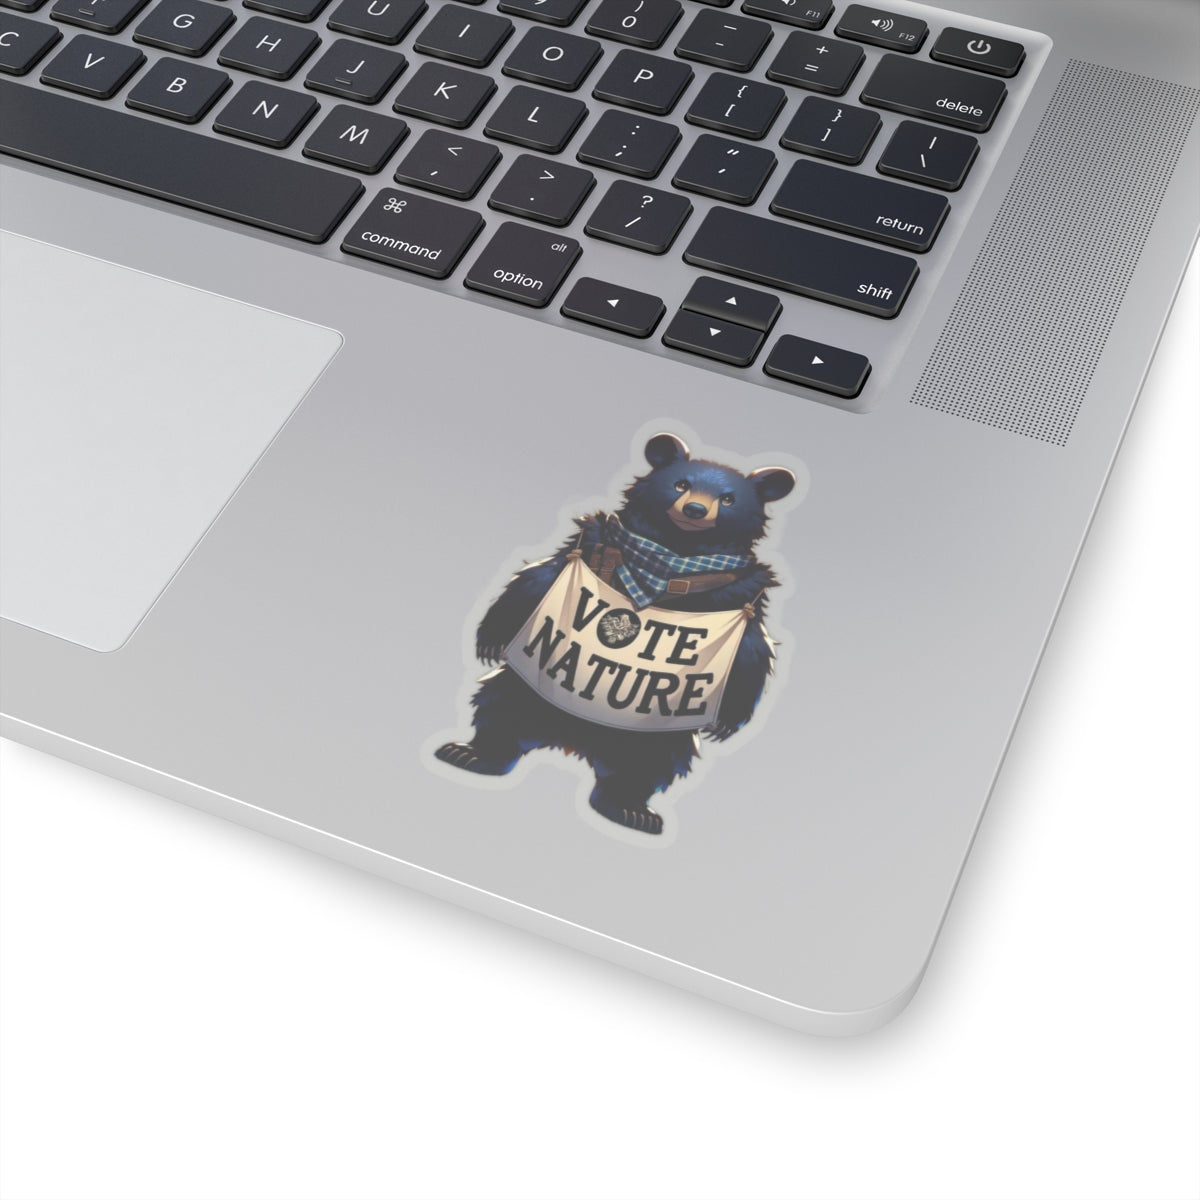 Inspirational Caring Black Bear vinyl Sticker: Vote Nature! for laptop, kindle, phone, ipad, instrument case, notebook, mood board, or wall